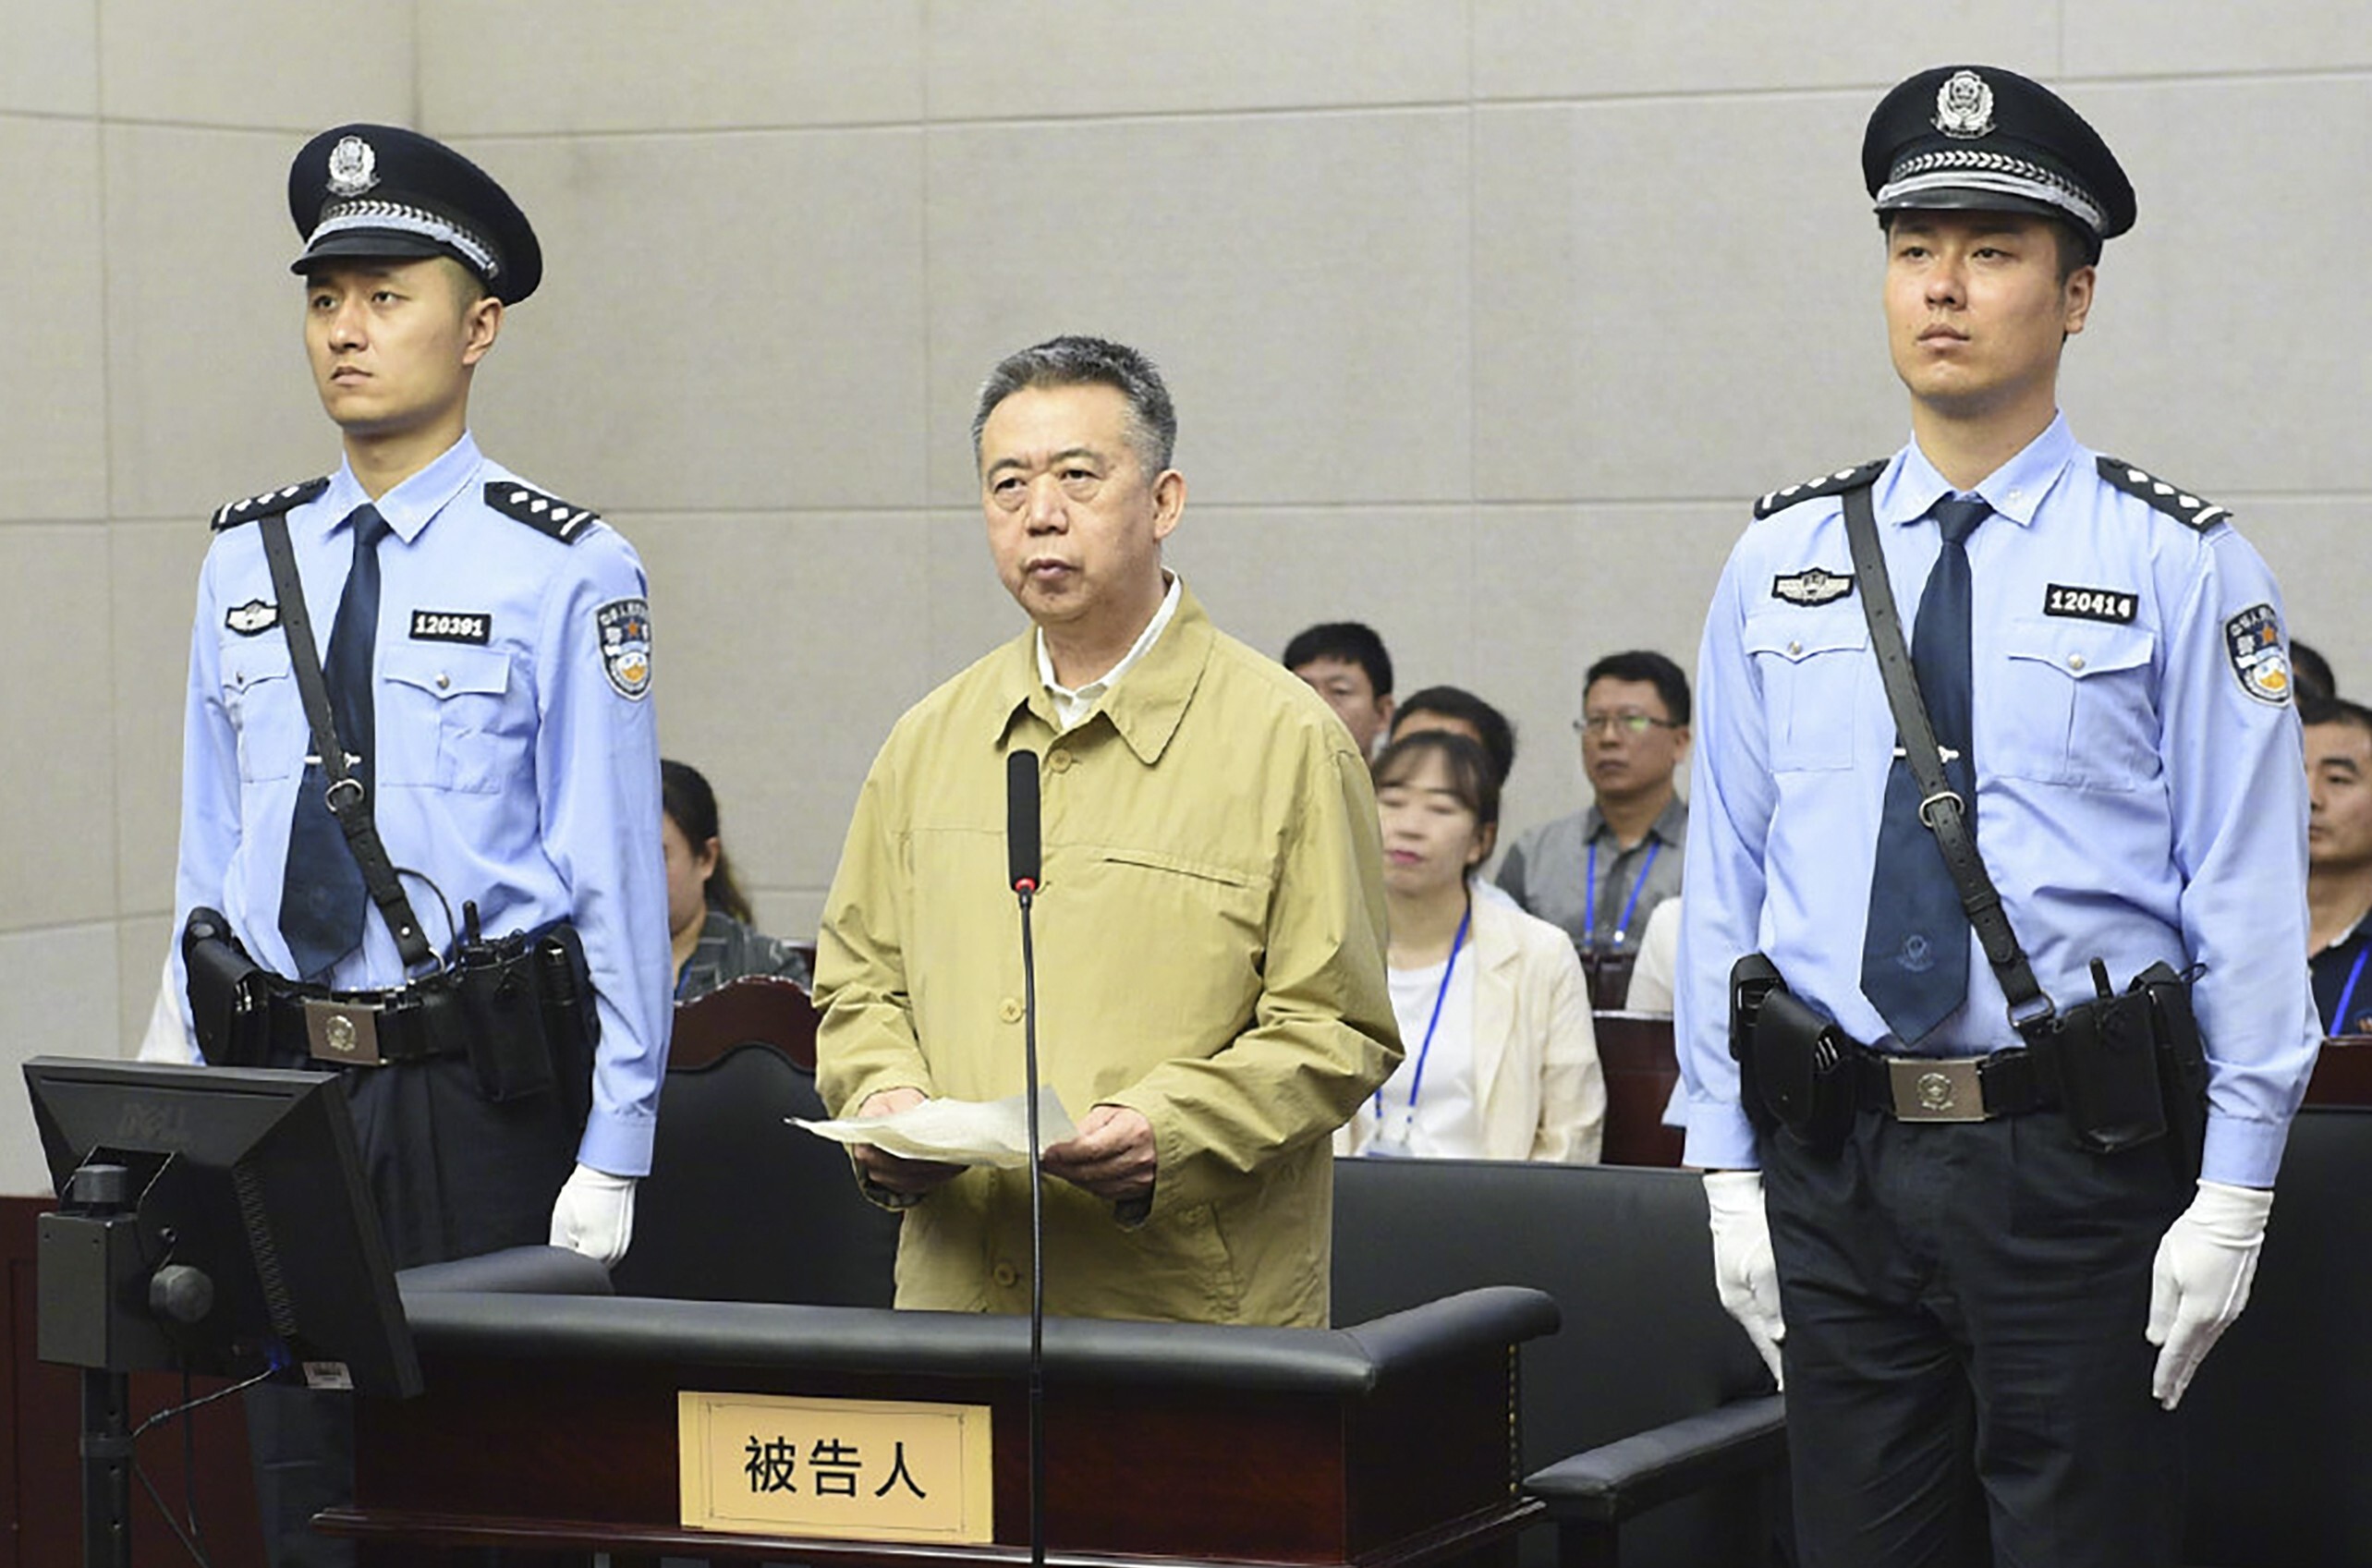 Meng Hongwei disappeared in 2018 and was jailed in January this year. Photo: Handout